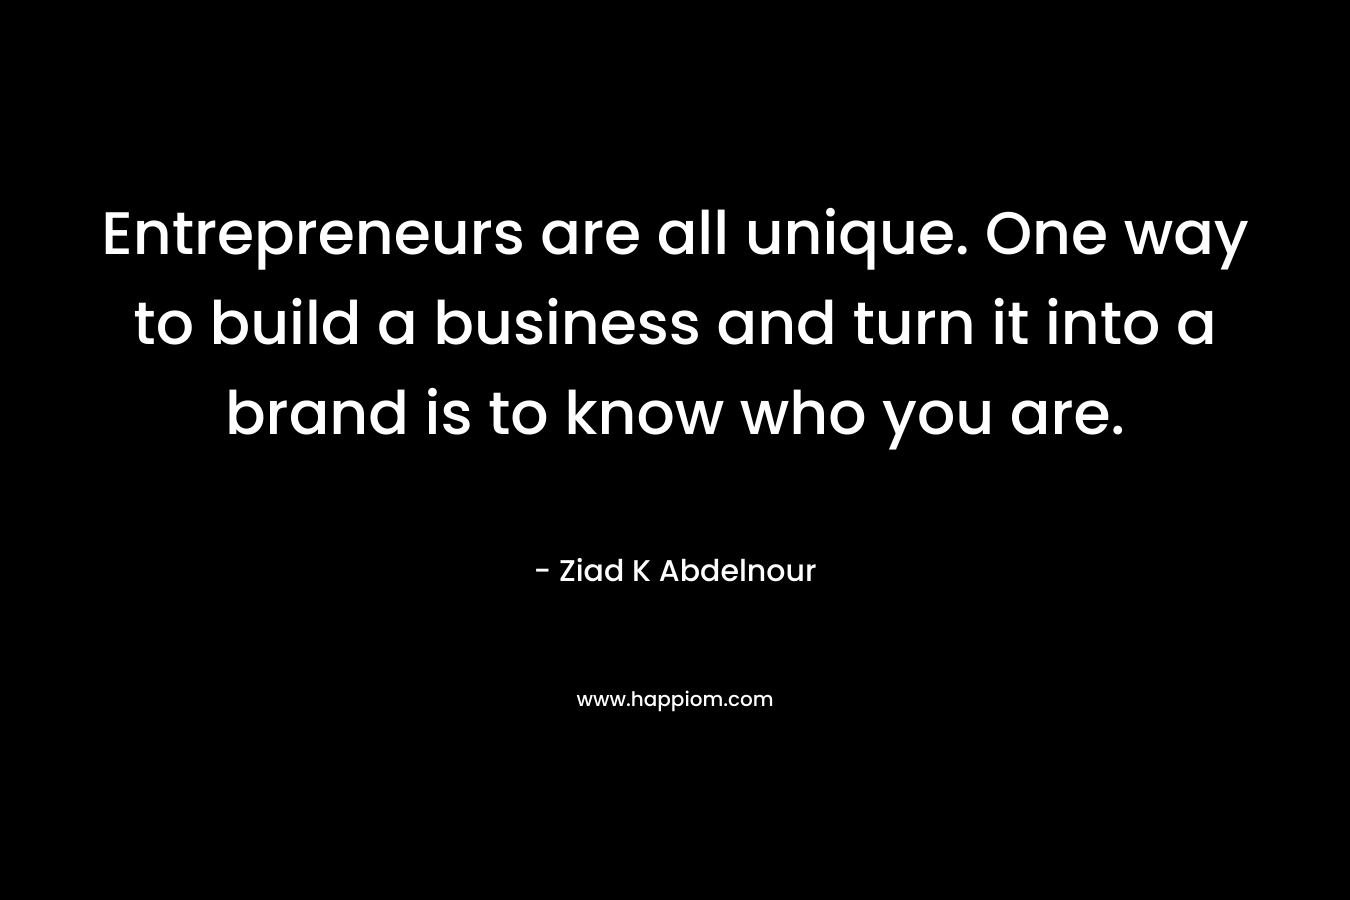 Entrepreneurs are all unique. One way to build a business and turn it into a brand is to know who you are.